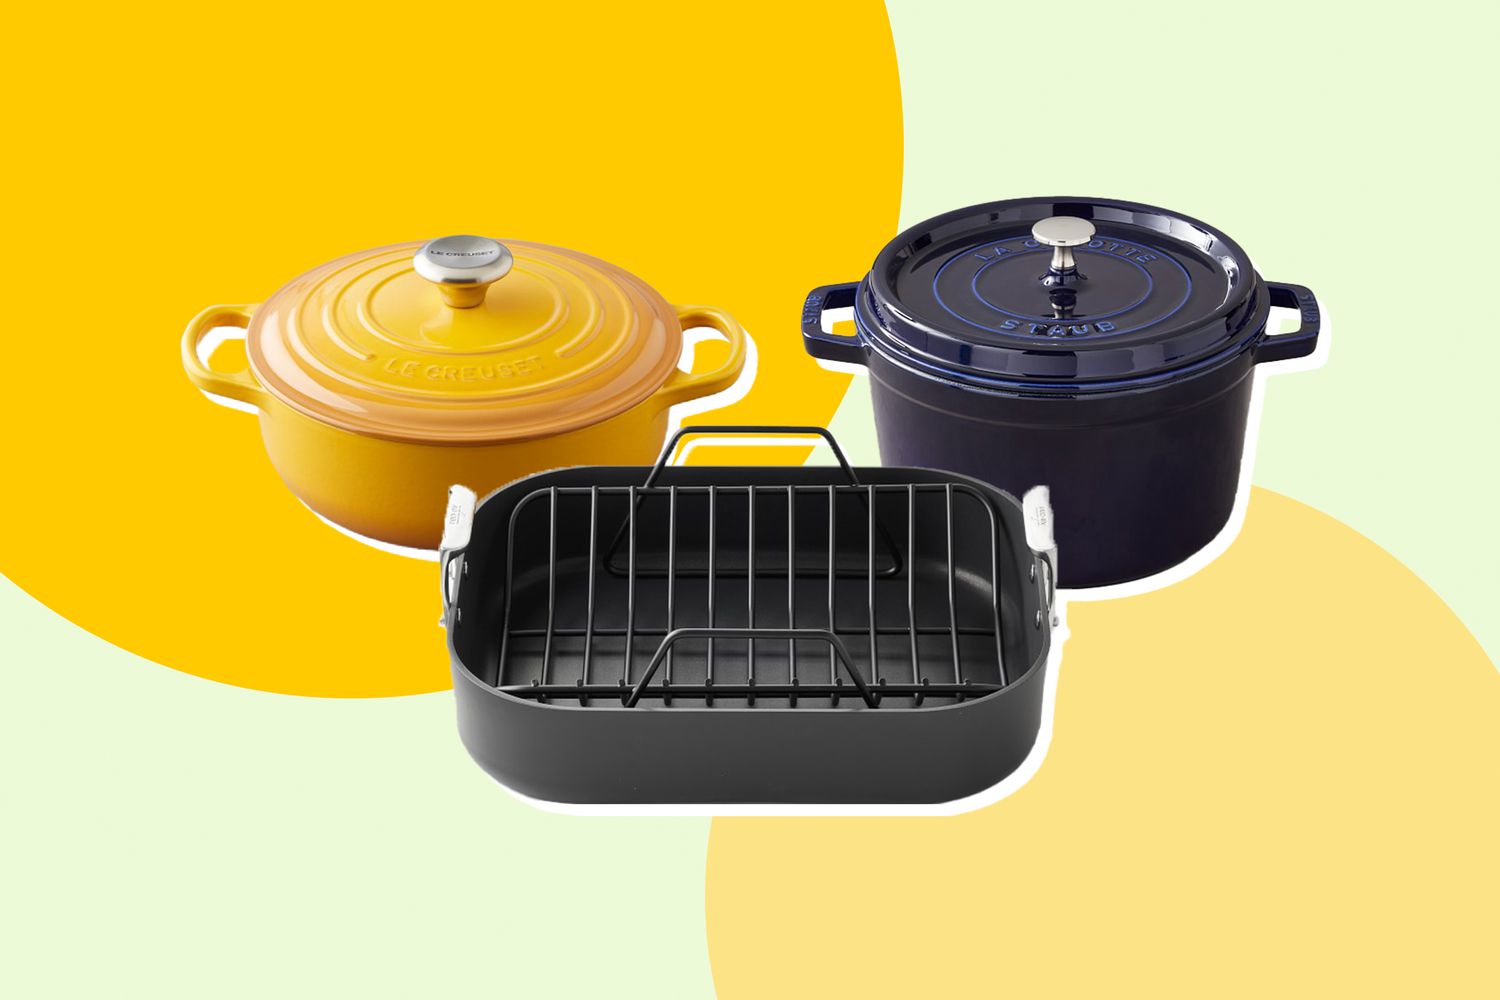 3 pieces of cookware on a designed background